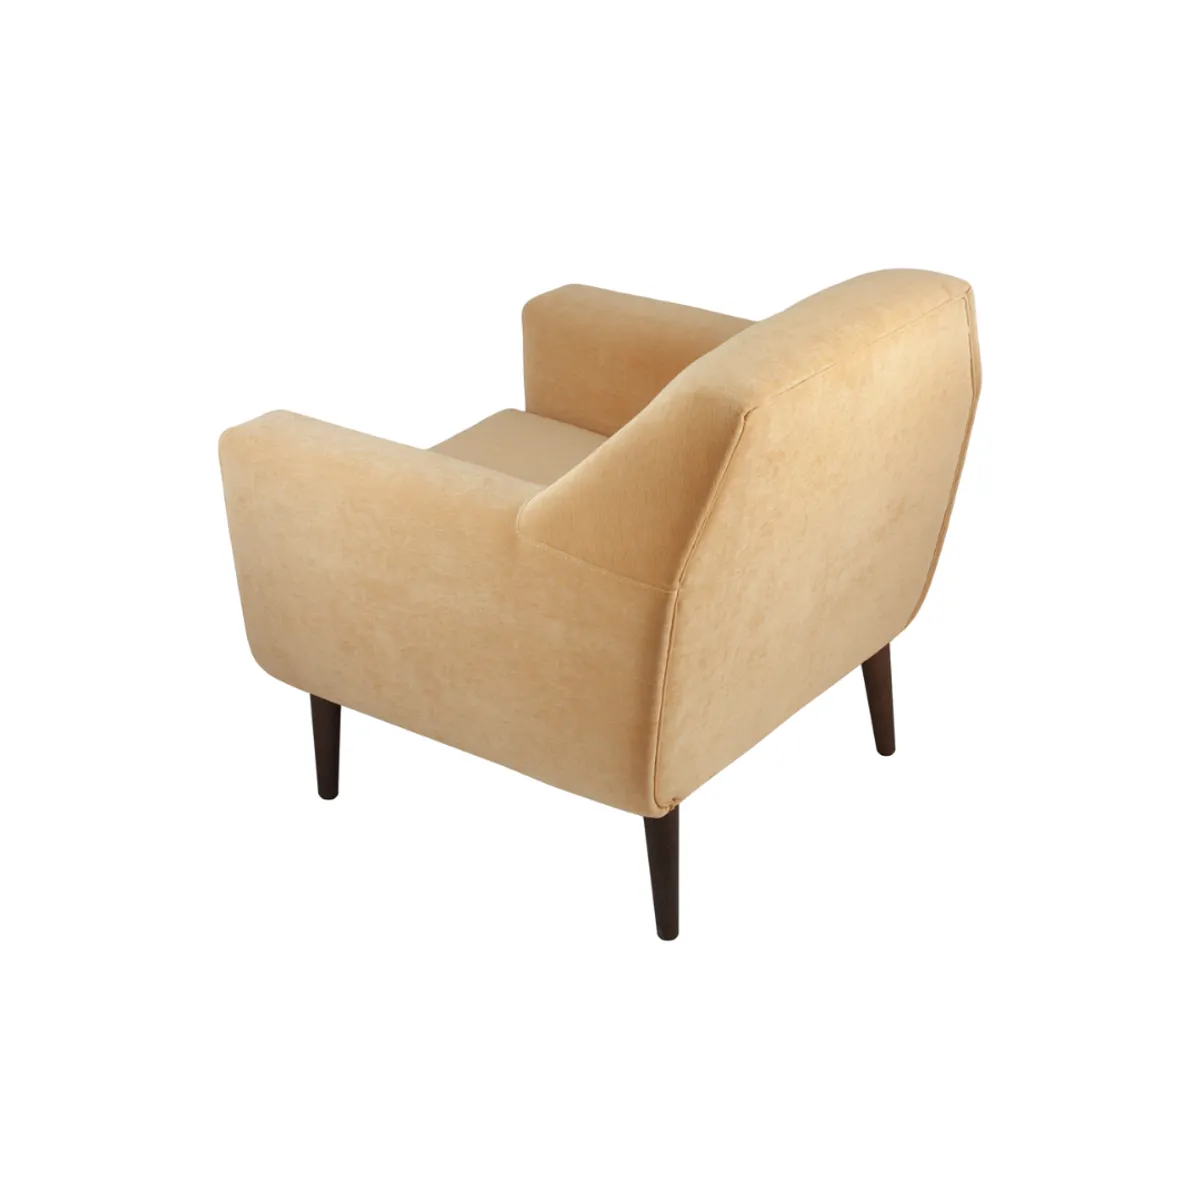 Garbo lounge chair 4